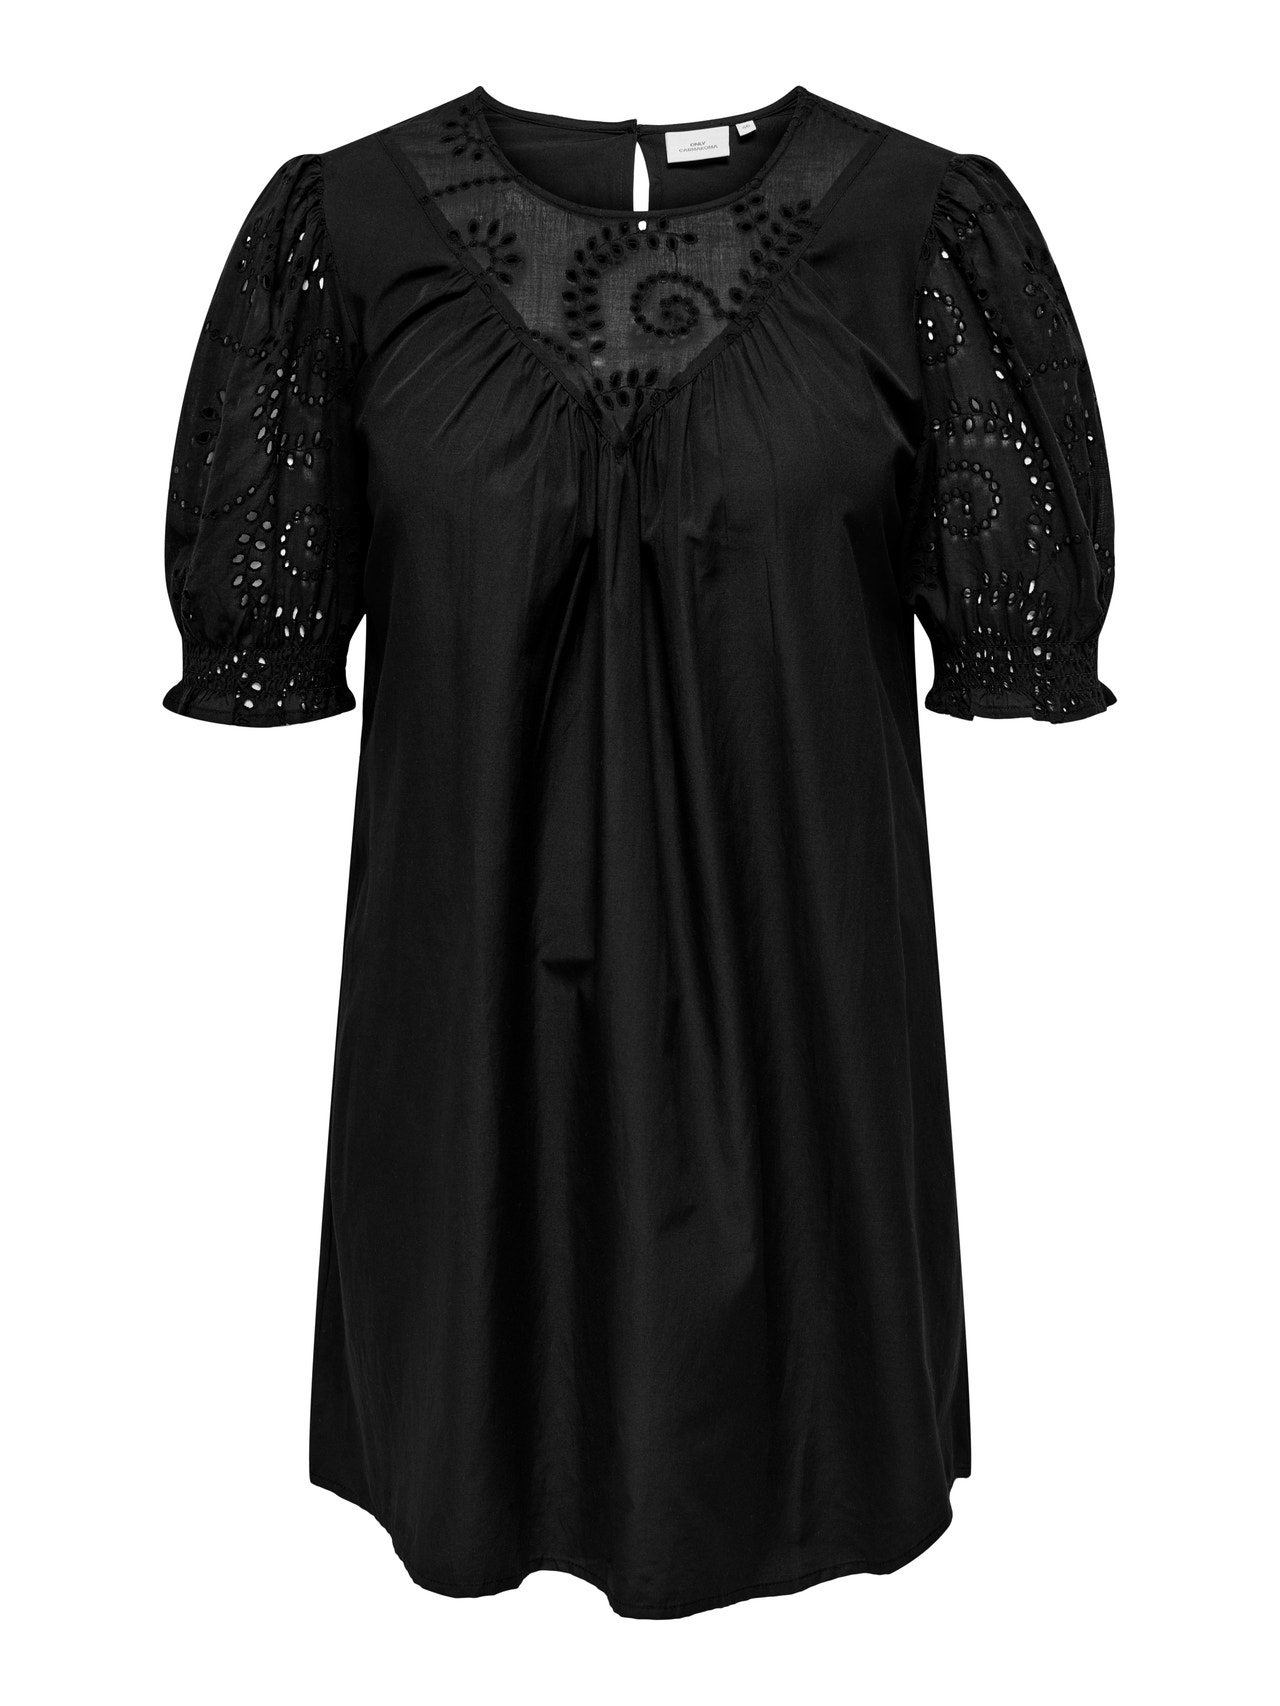 ONLY Curvy midi dress with lace -Black - 15320013